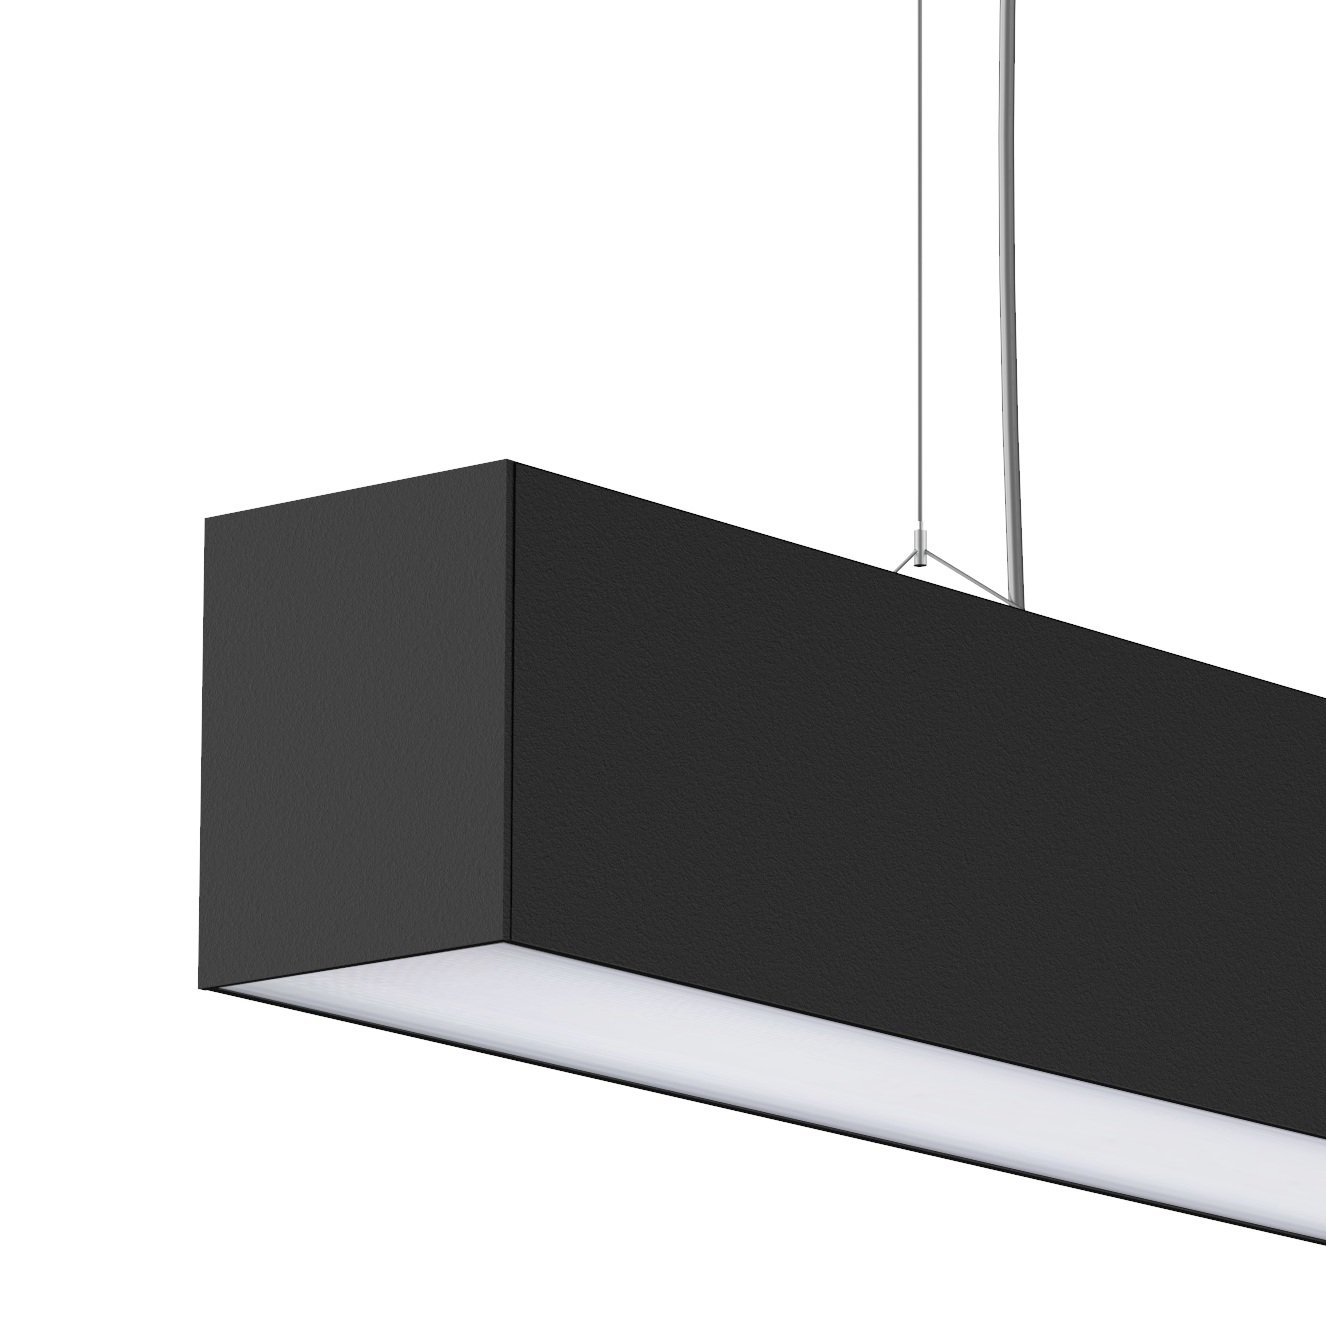 Architectural suspended lighting